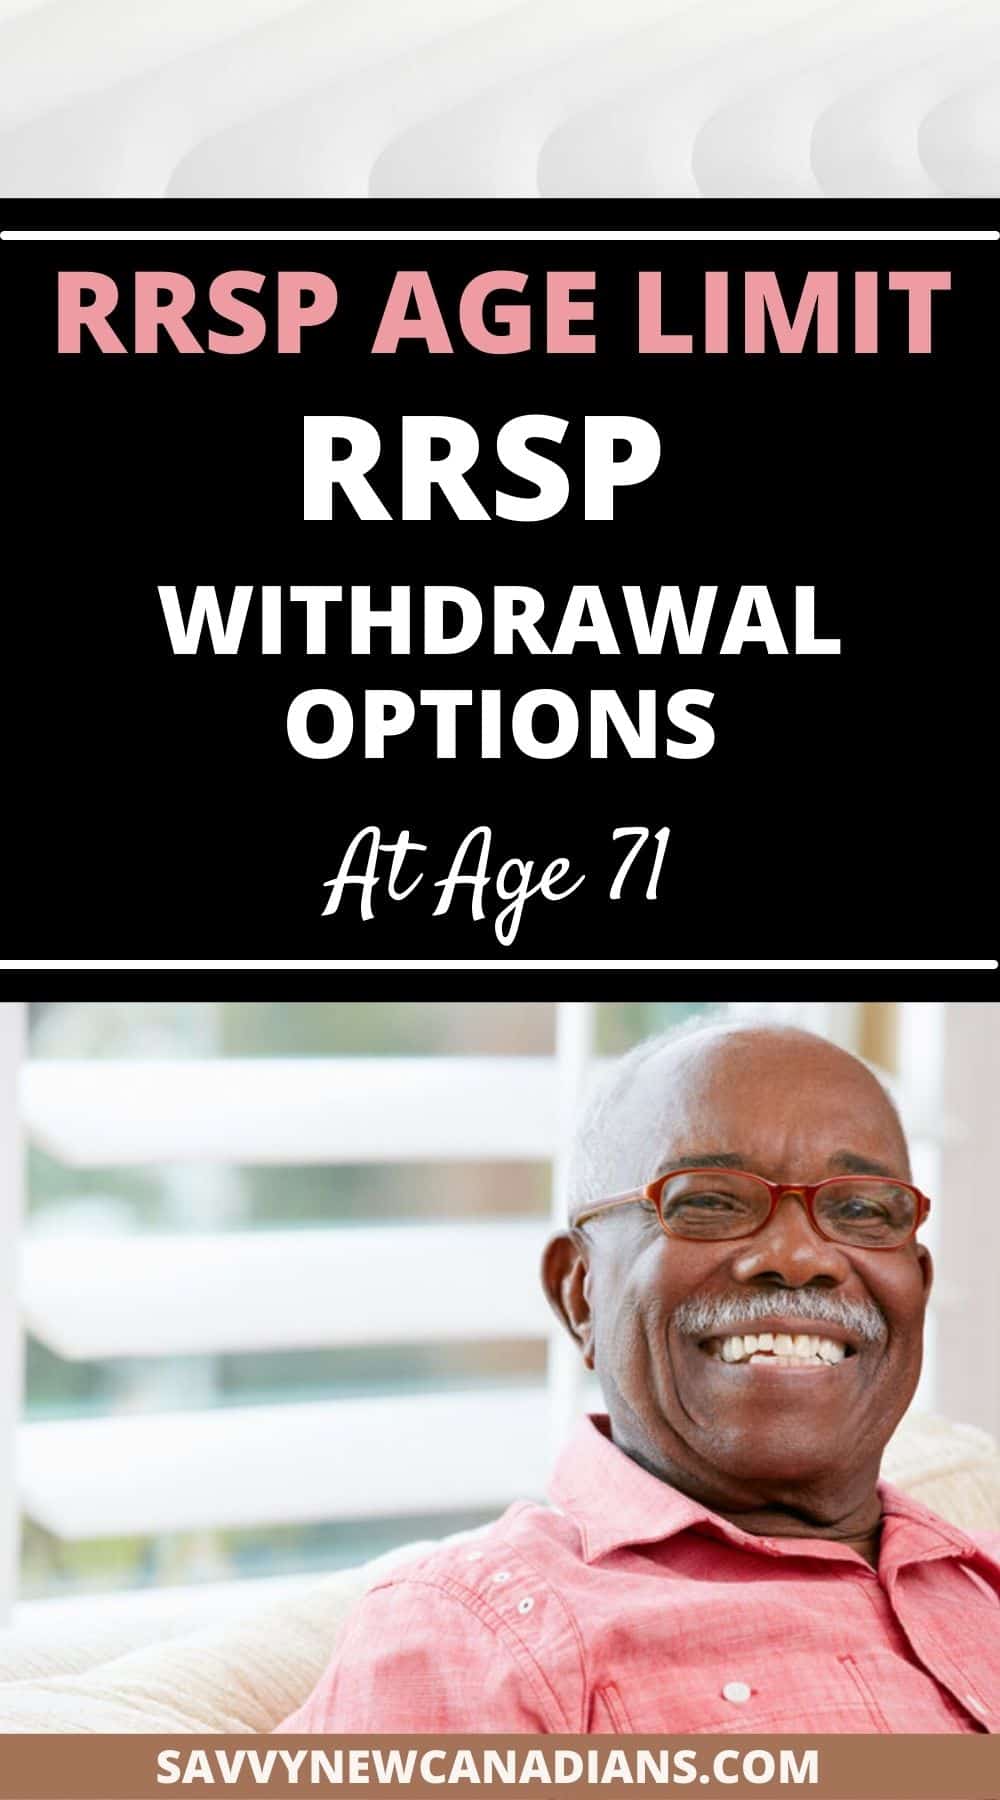 RRSP Age Limit: Withdrawal Options at Age 71